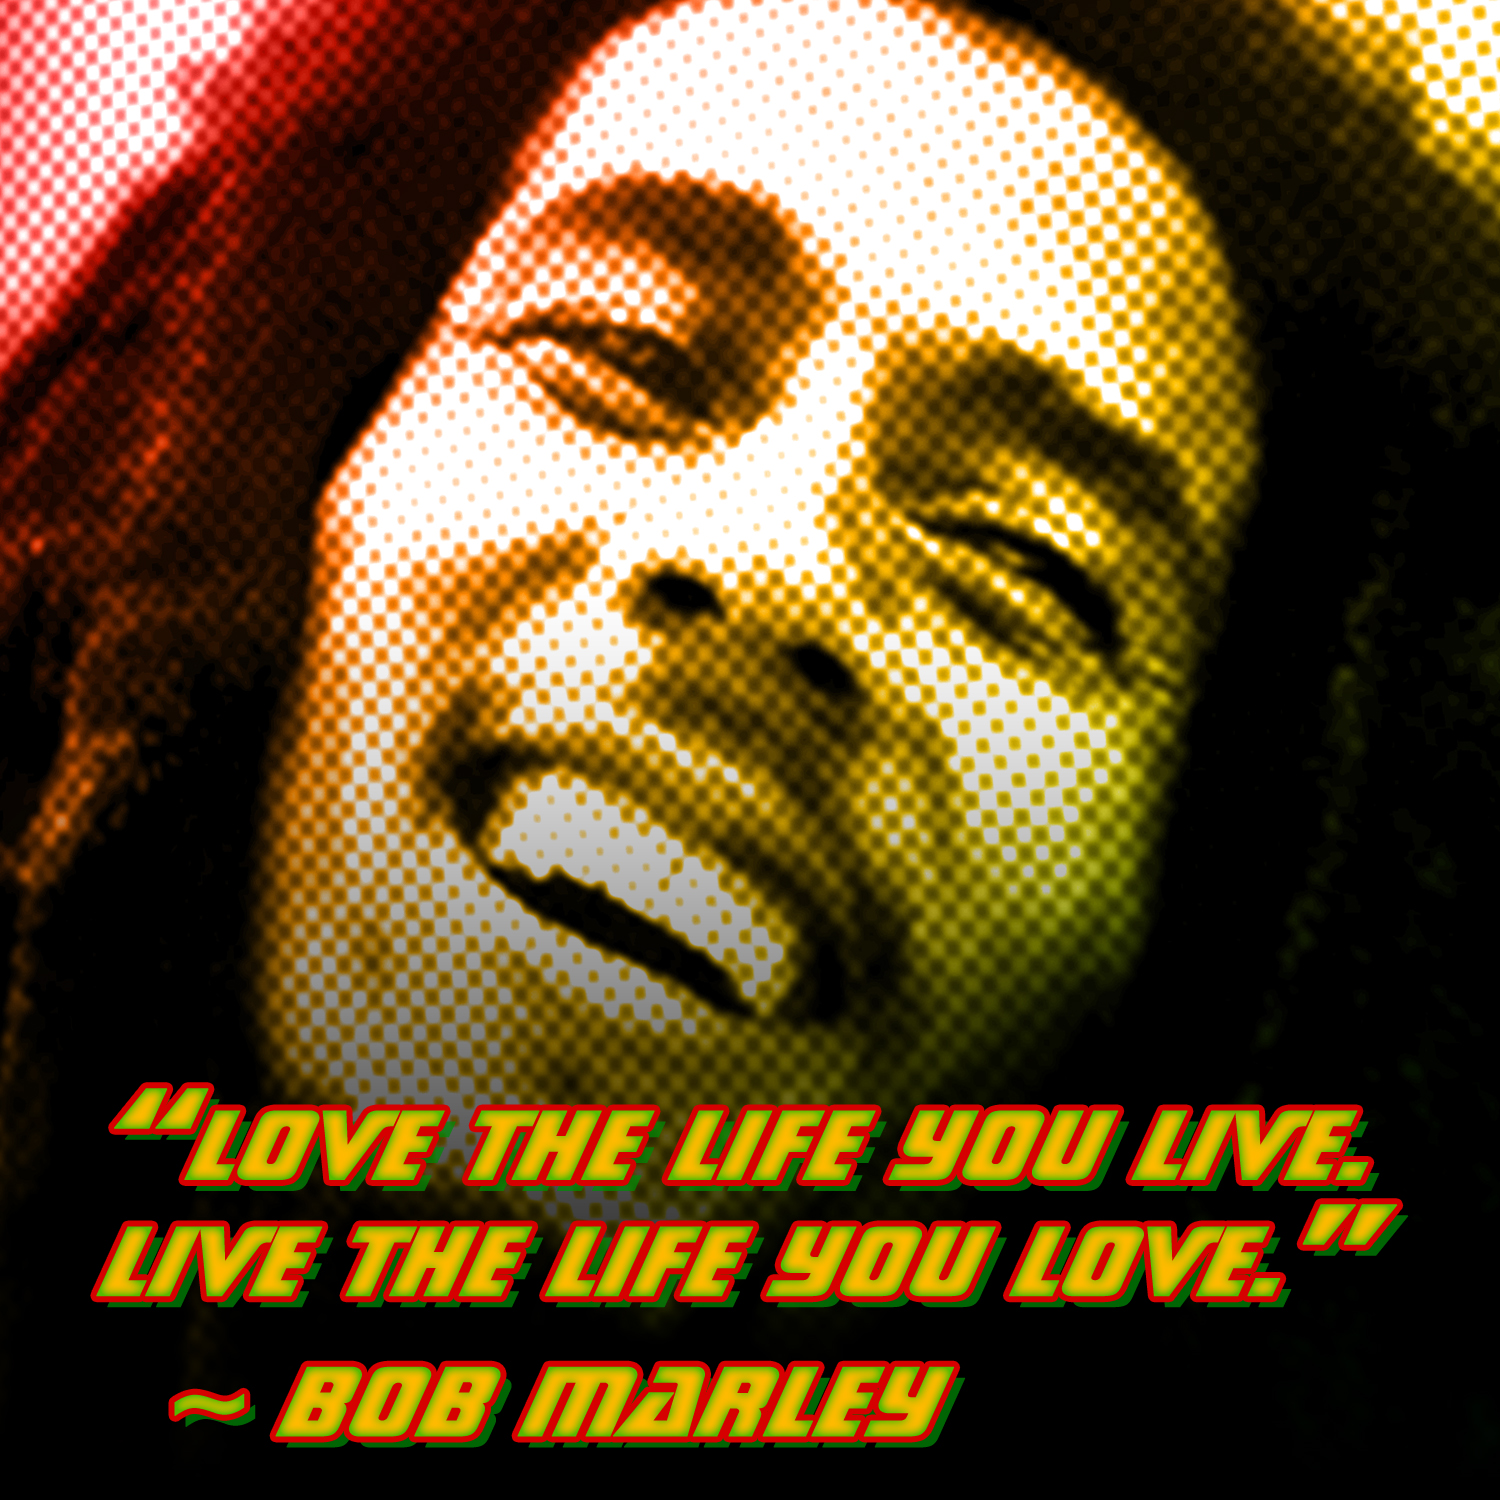 Bob Marley Quotes | Dictionary Quotes